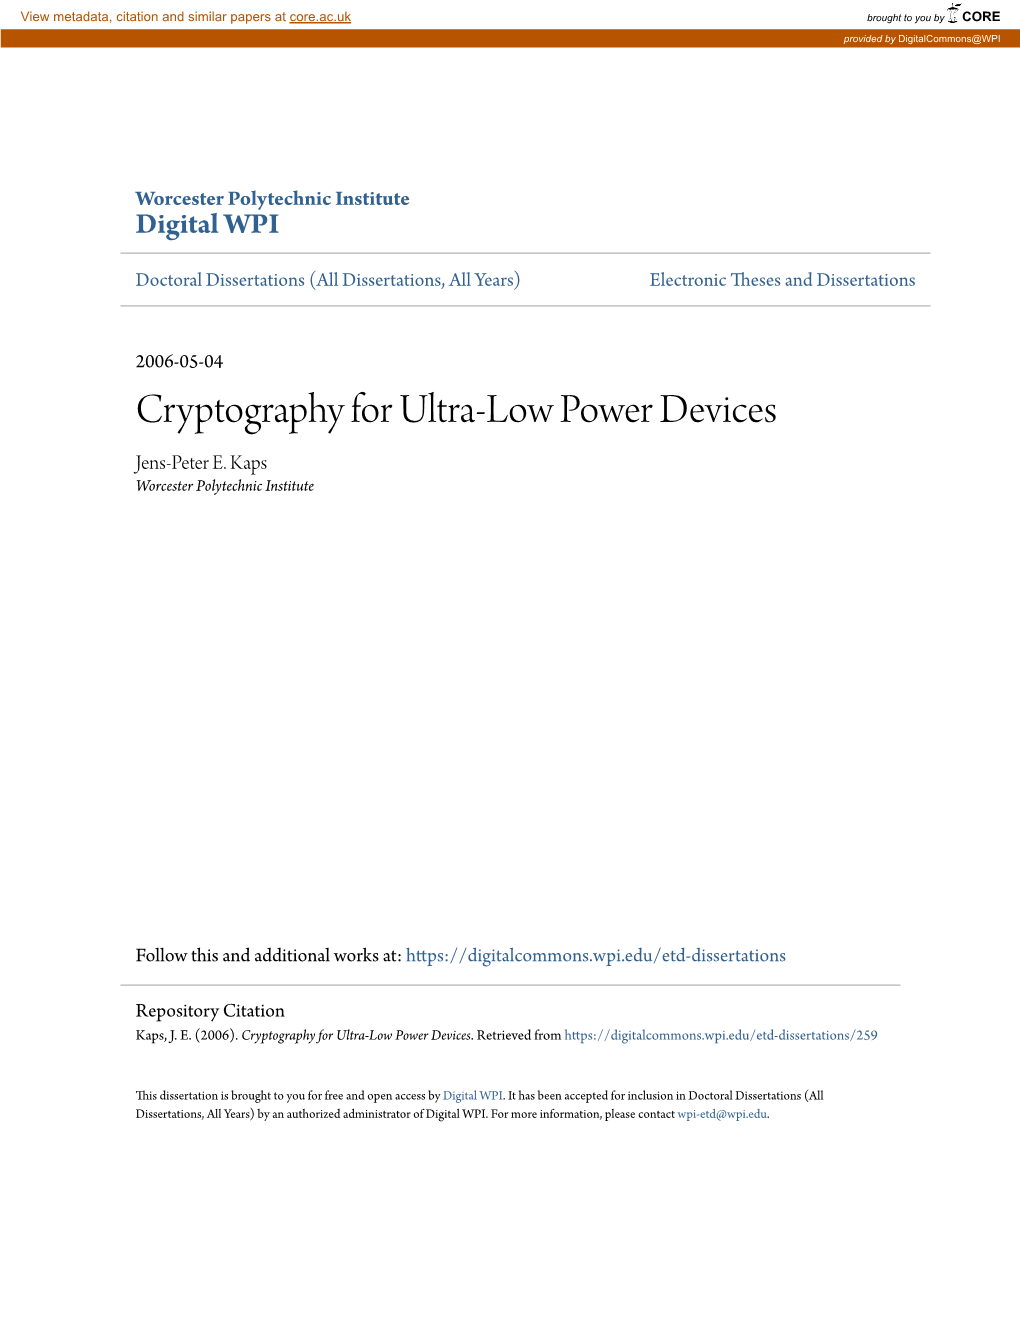 Cryptography for Ultra-Low Power Devices Jens-Peter E